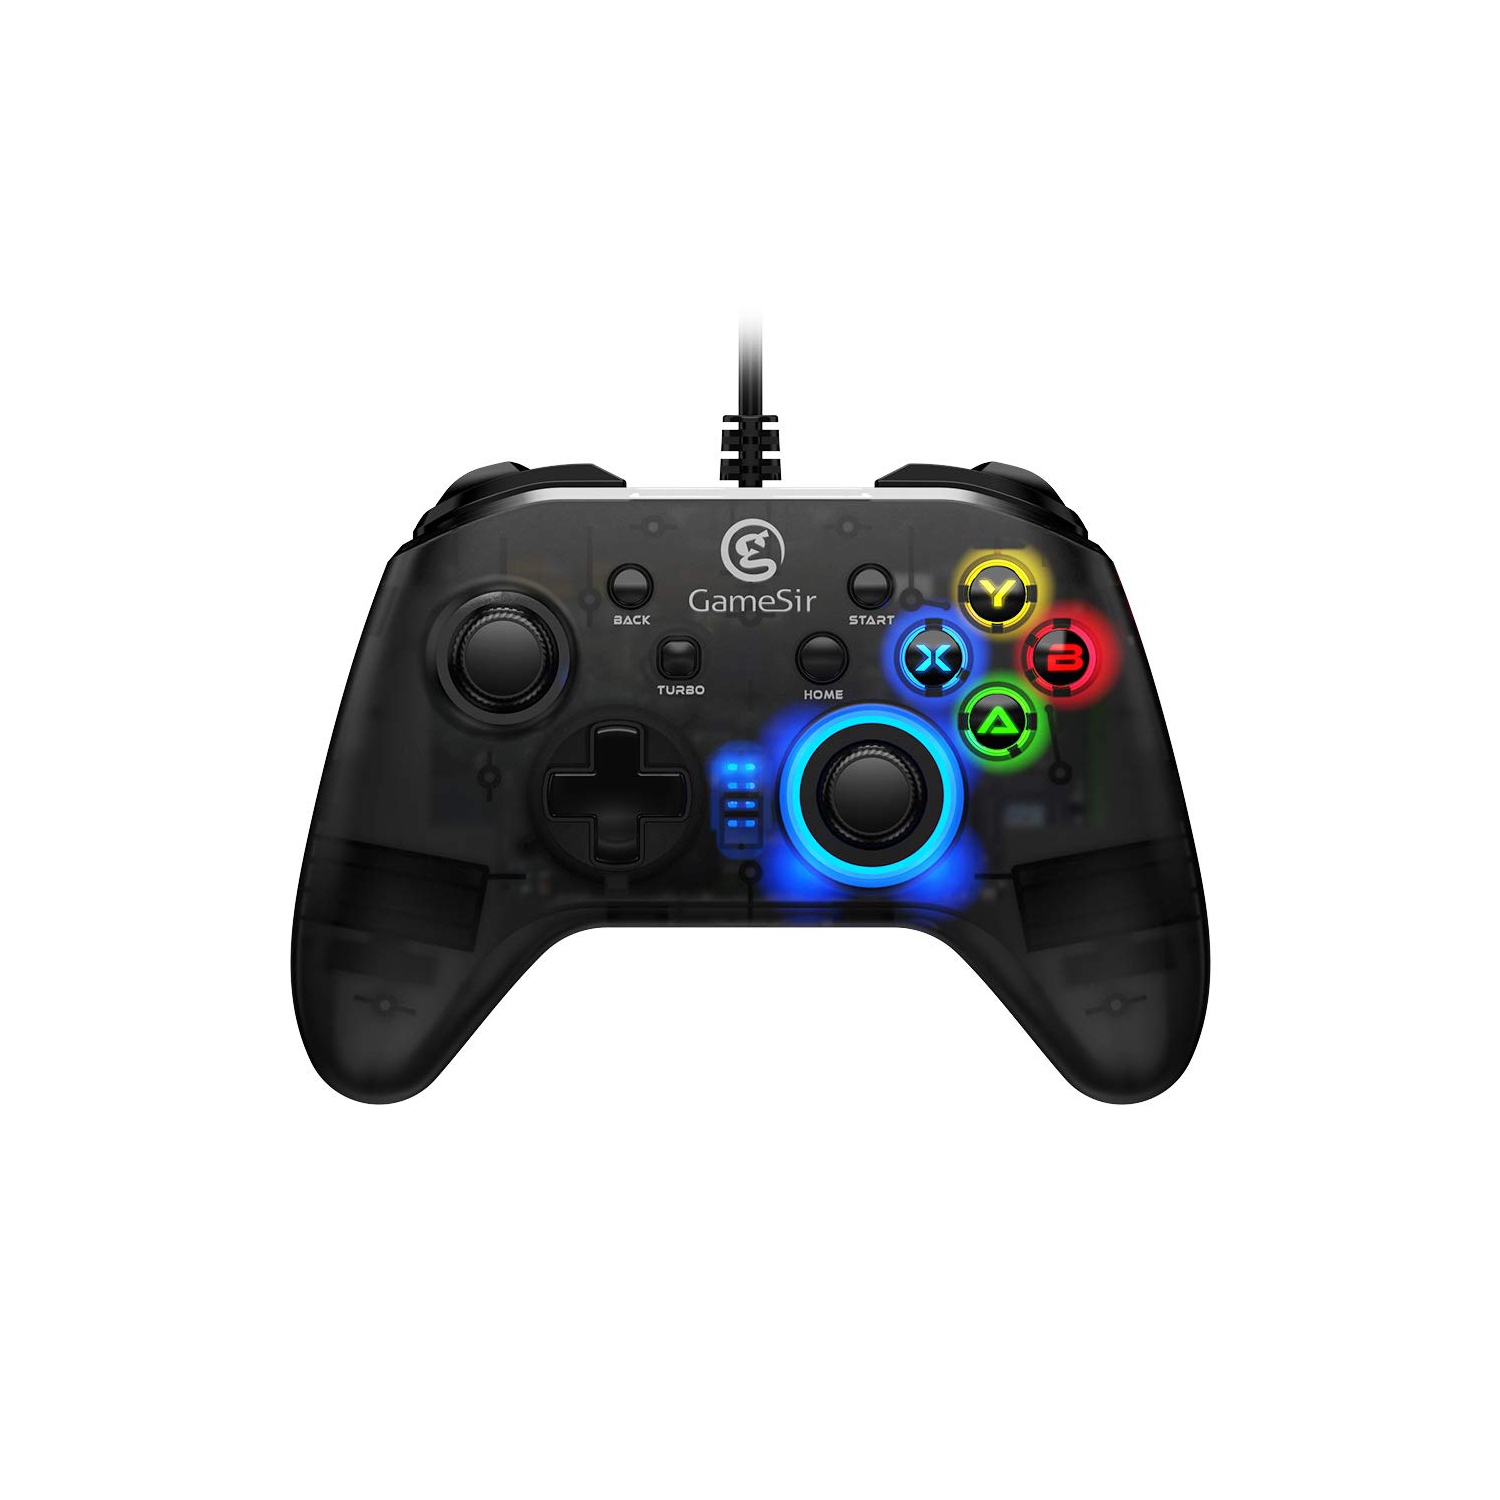 Wired PC Game Controller, GameSir T4w for Windows 7/8/8.1/10 with LED Backlight